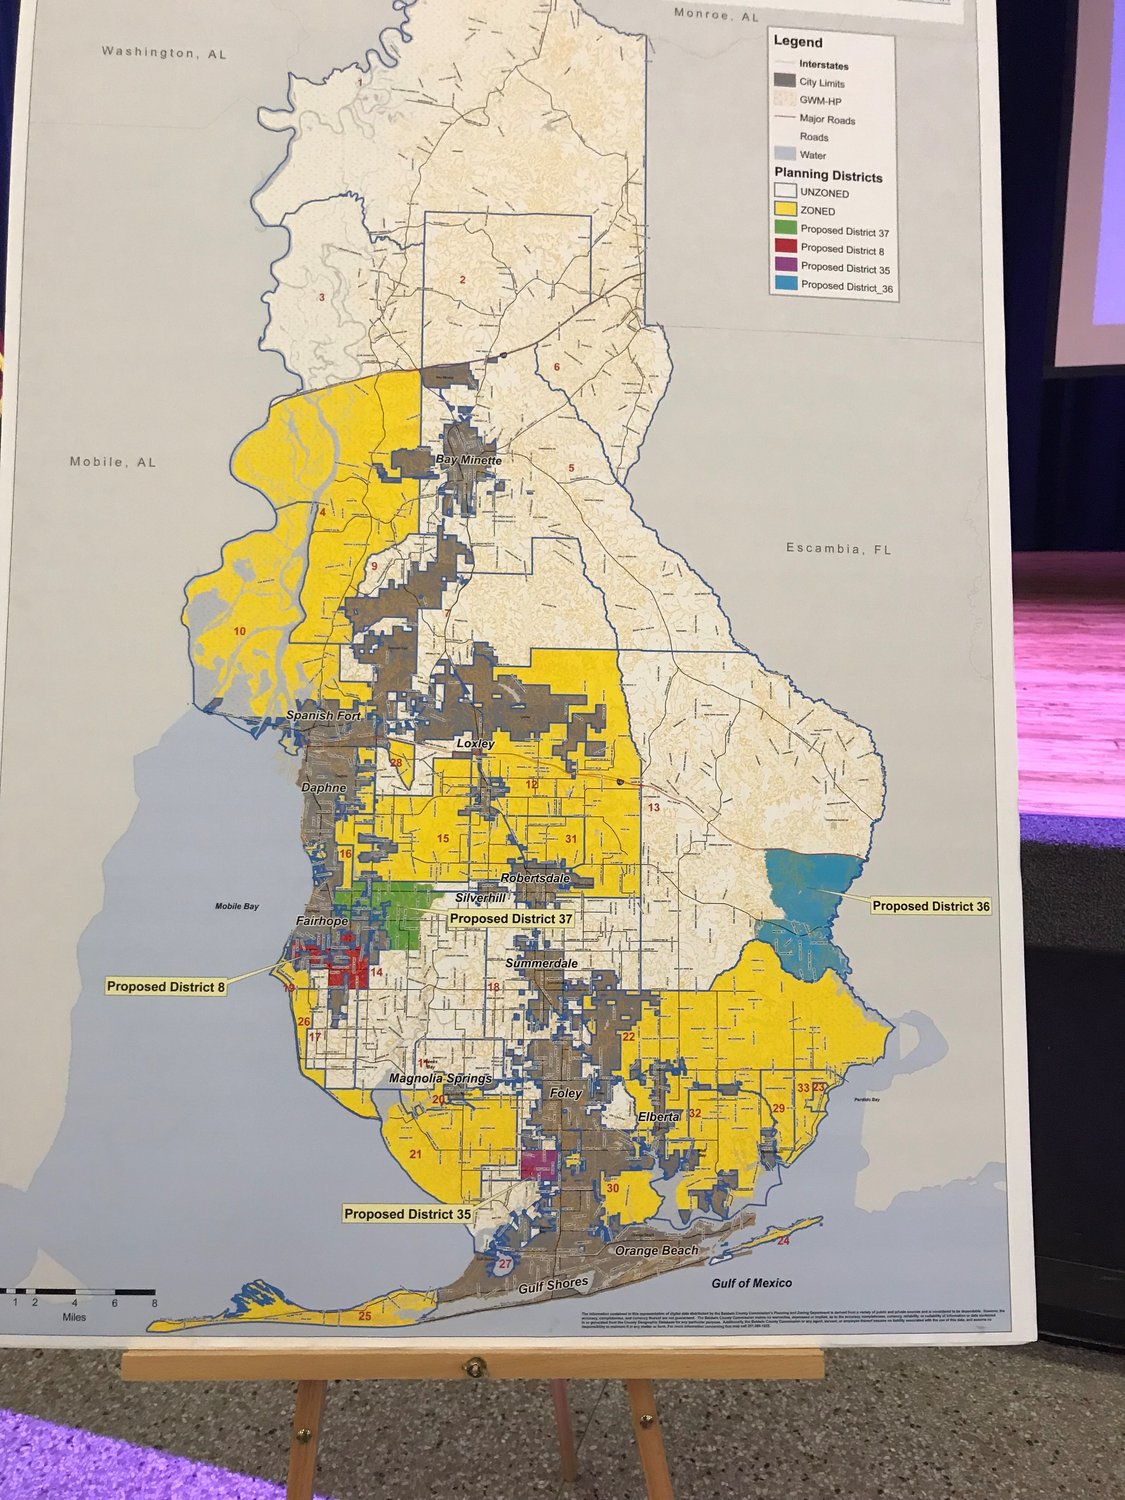 Areas with county zoning are shown in yellow on a map used at public meetings on Baldwin's long-range land-use plan. Municipalities are in gray.